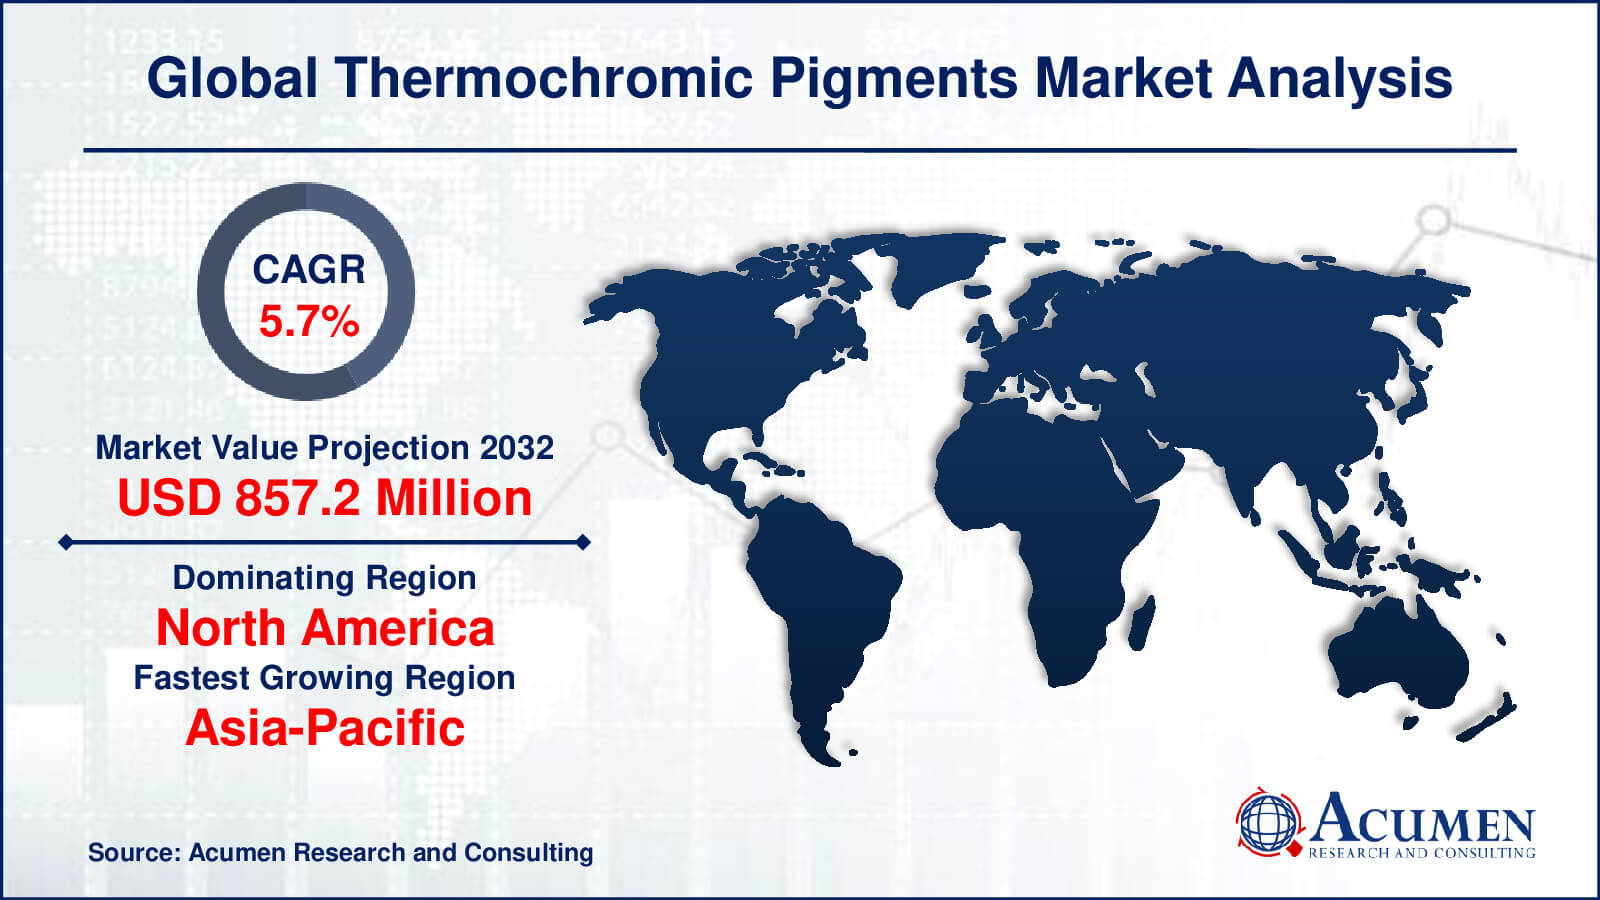 Thermochromic Pigment Market To Register Steady Growth During 2022 – 2030